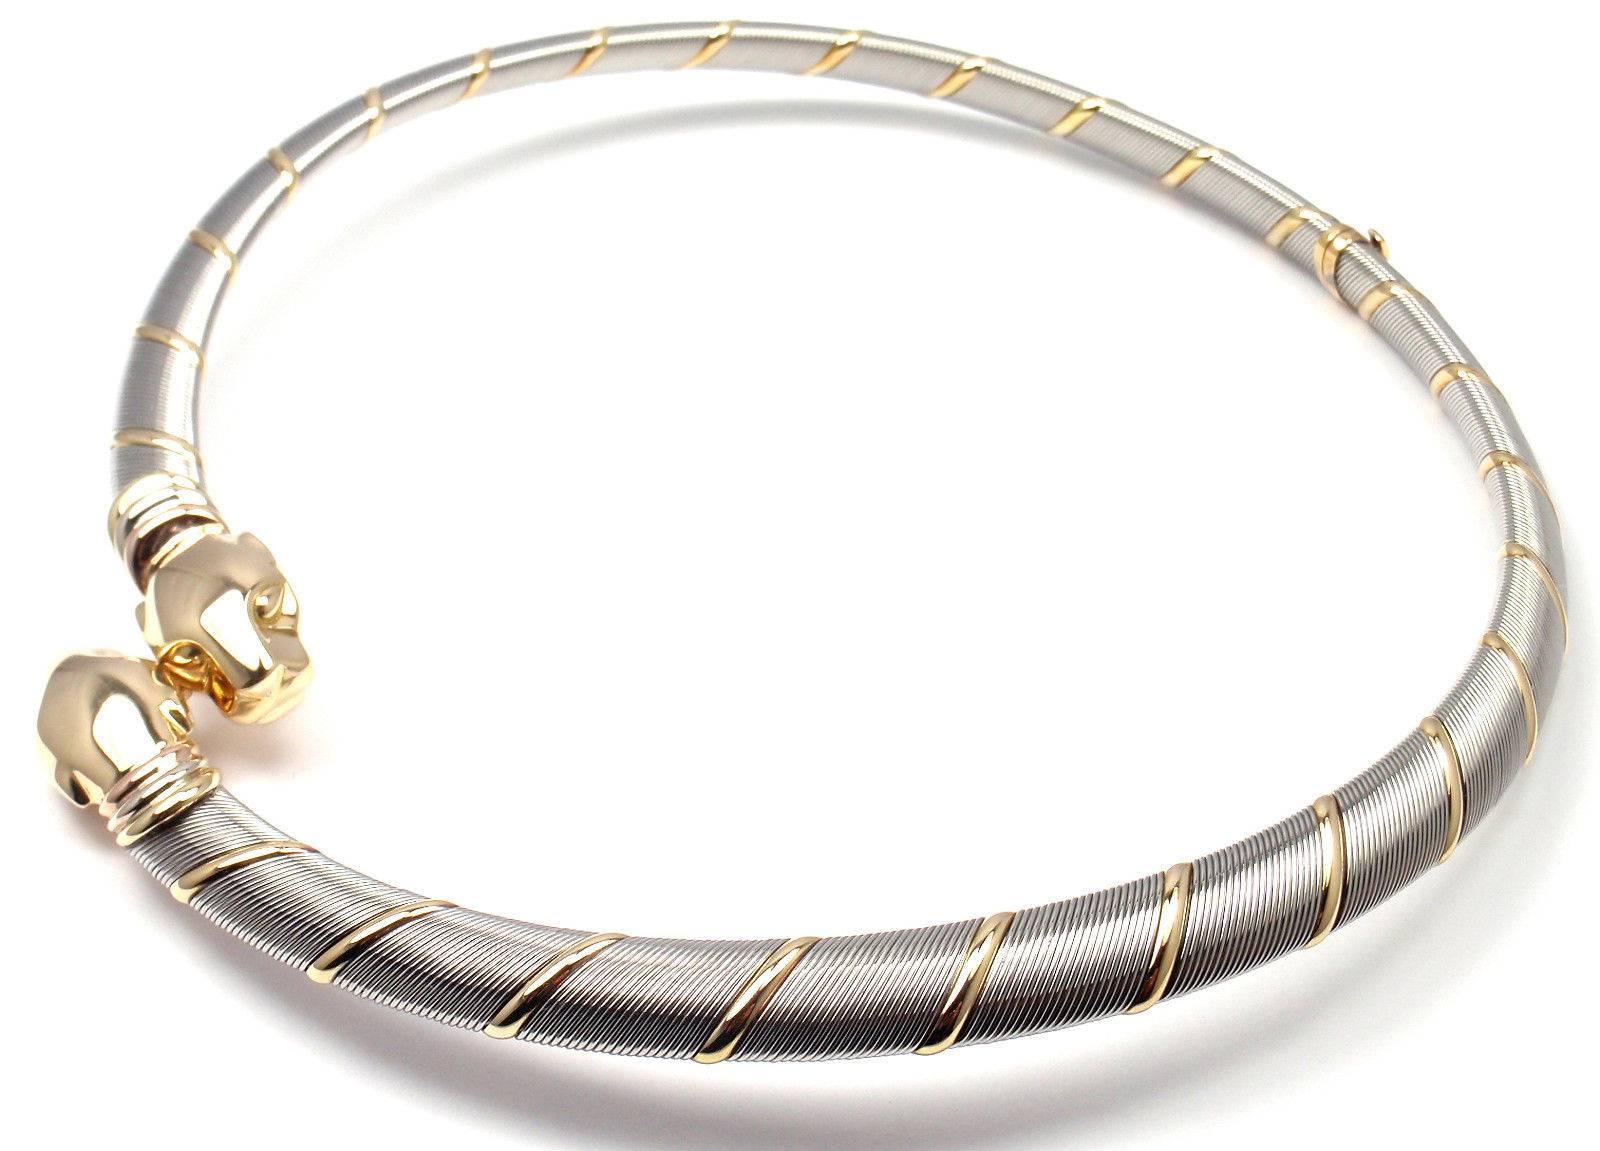 18k Tri-Color (Yellow, White, Pink) Gold And Stainless Steel Panther Necklace by Cartier. 
This beautiful necklace comes with its original Cartier box. 

Details: 
Weight: 72.6 grams
Length: 16